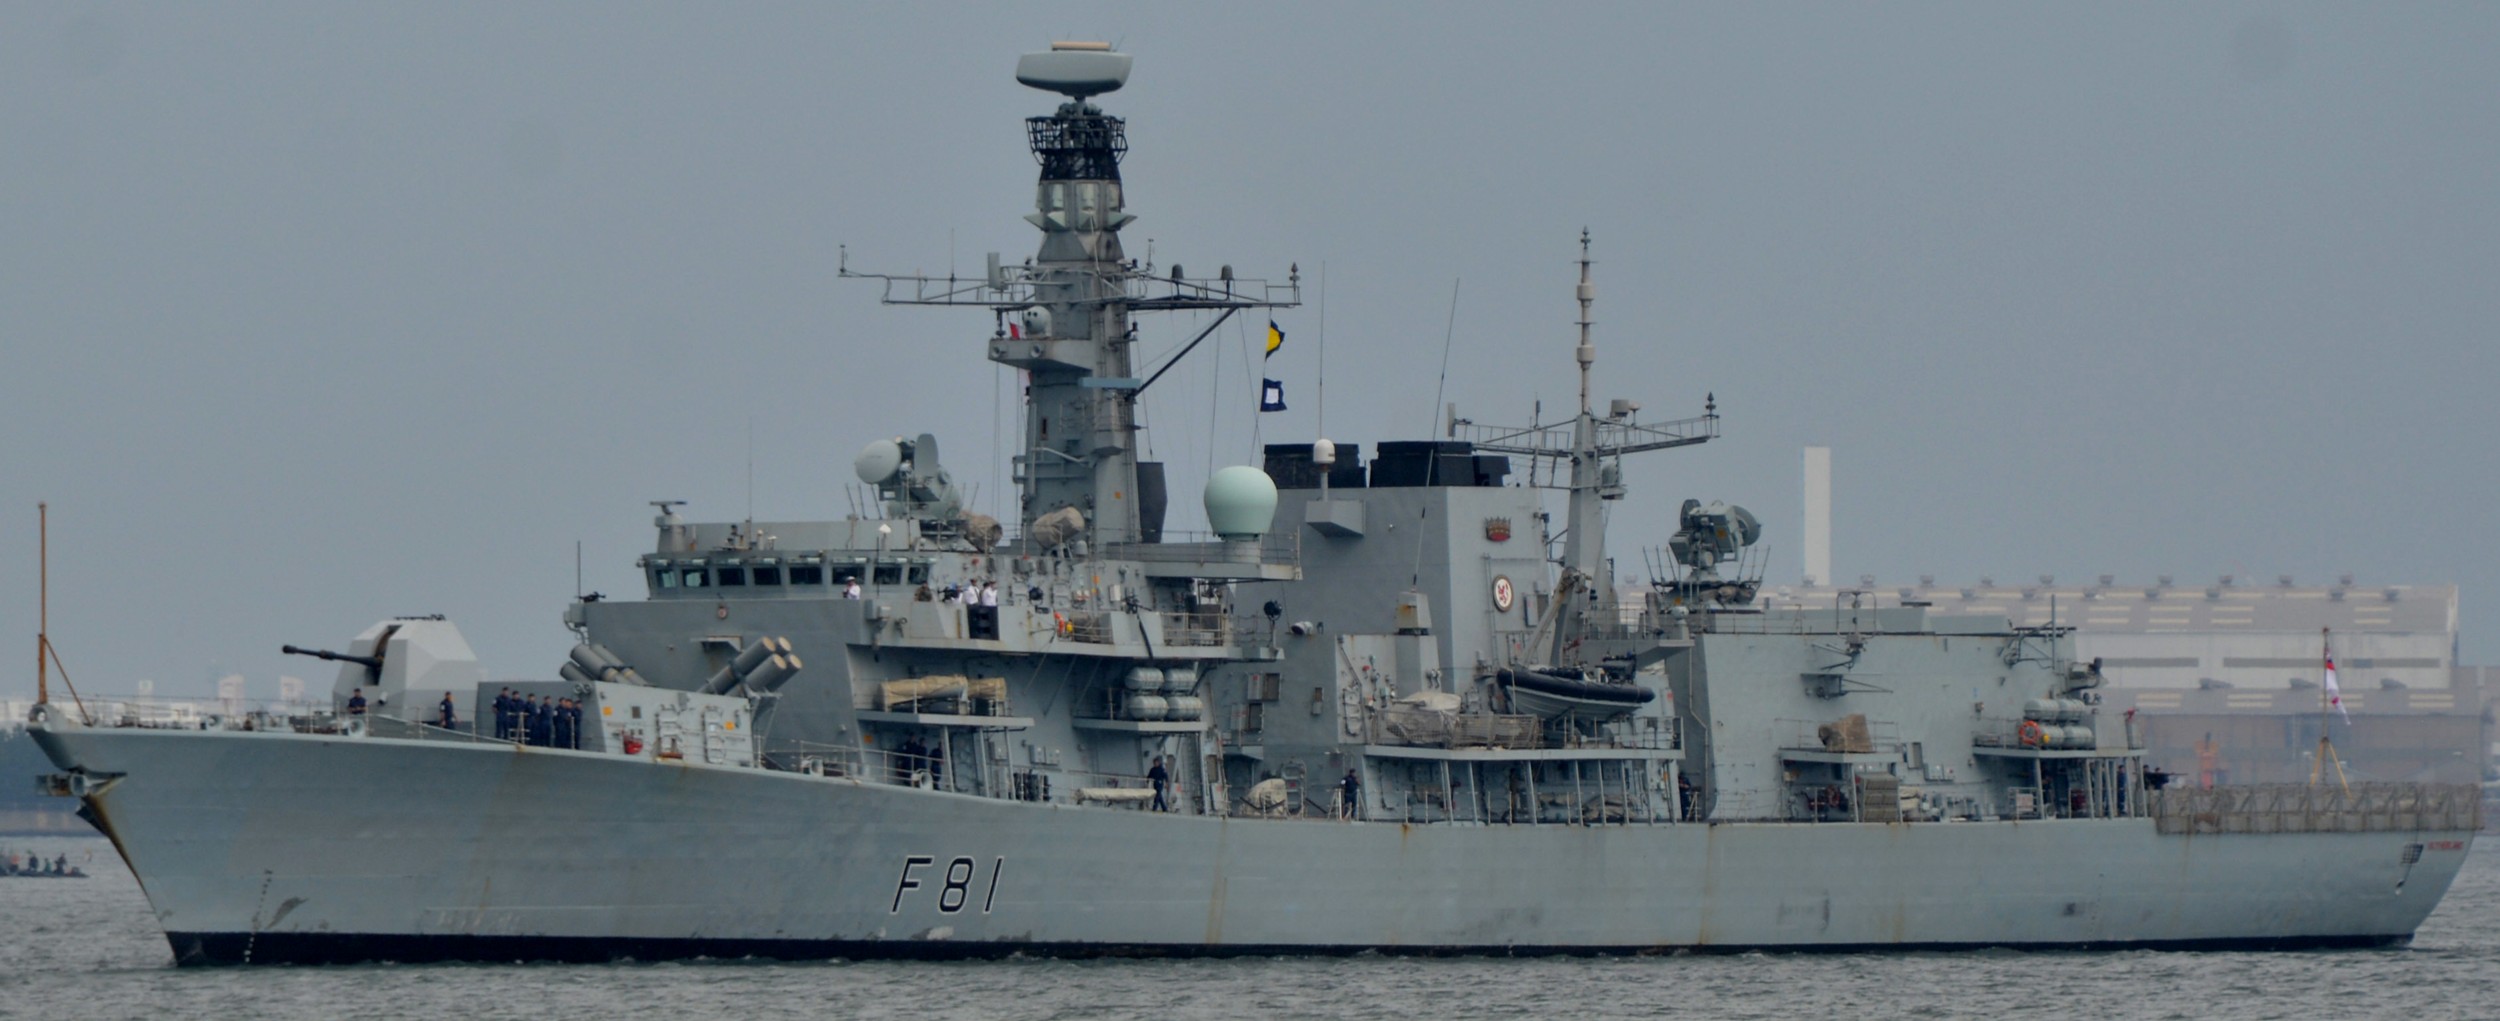 f-81 hms sutherland type 23 duke class guided missile frigate ffg royal navy 49 japan